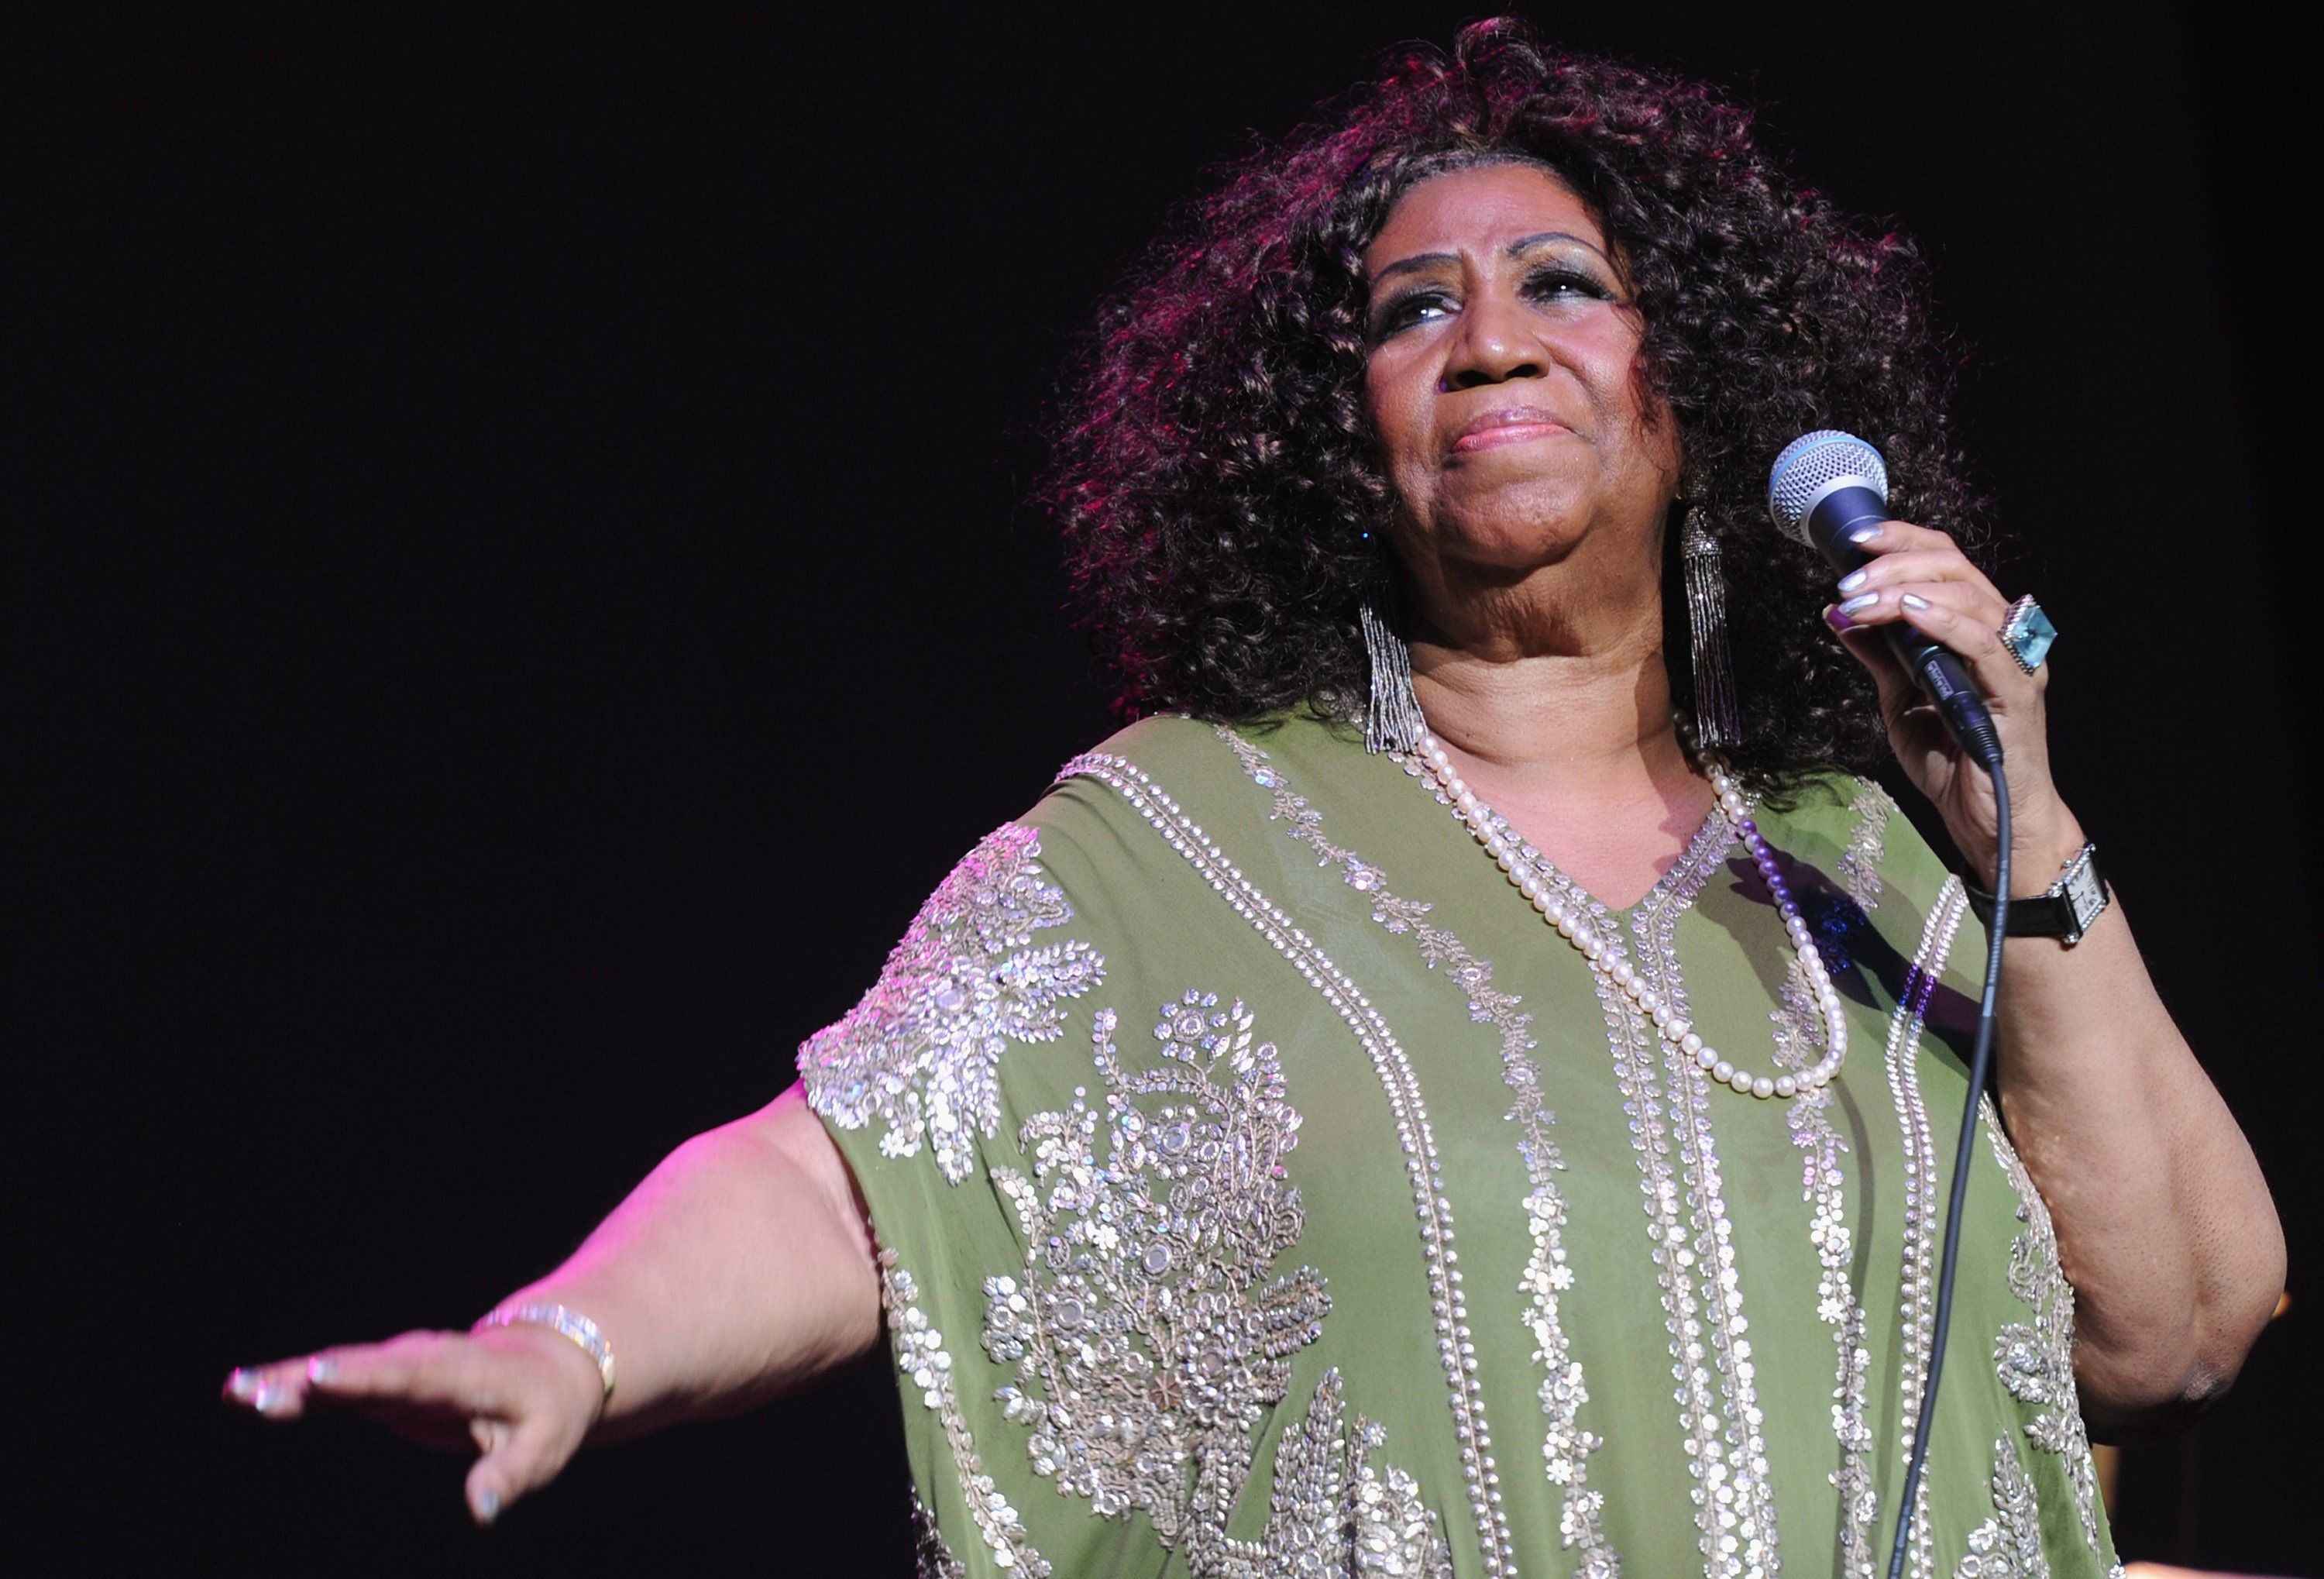 Aretha Franklin performing at the Fox Theatre in Atlanta, Georgia on March 5, 2012. | Source: Getty Images